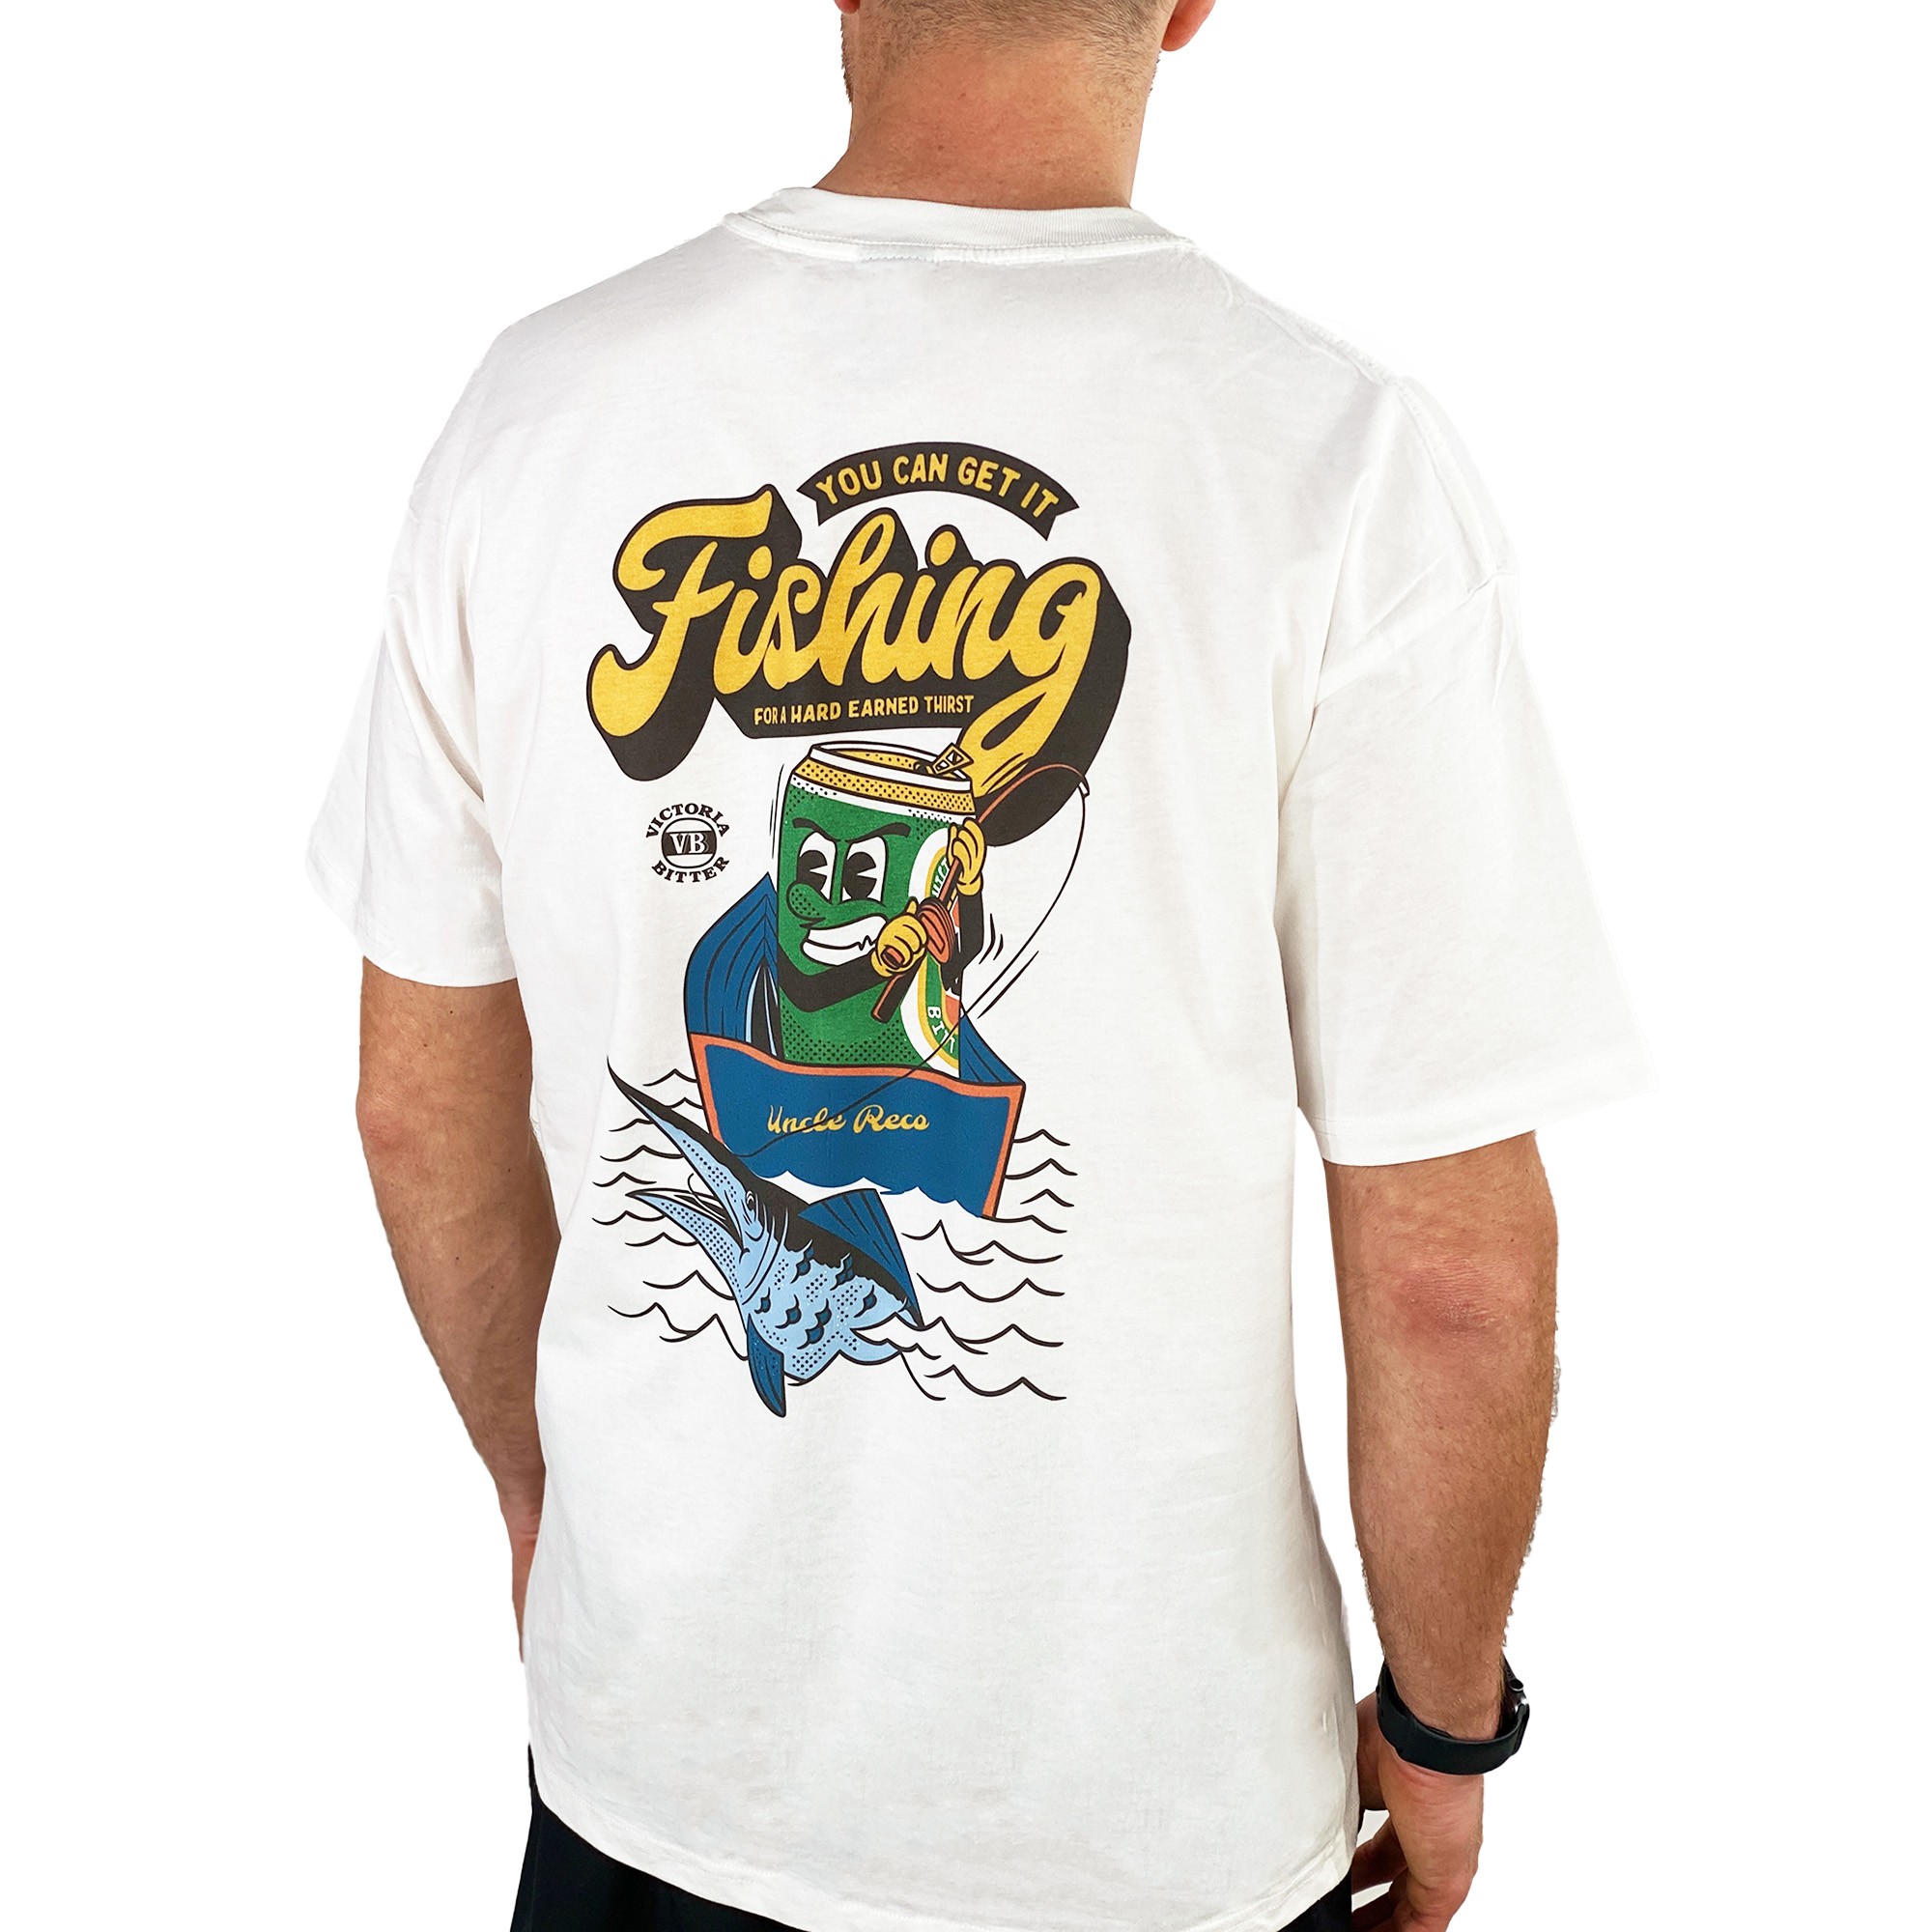 GET IT FISHING FRONT AND BACK VINTAGE TEE, Get It Fishing Front And Back Vintage T-Shirt